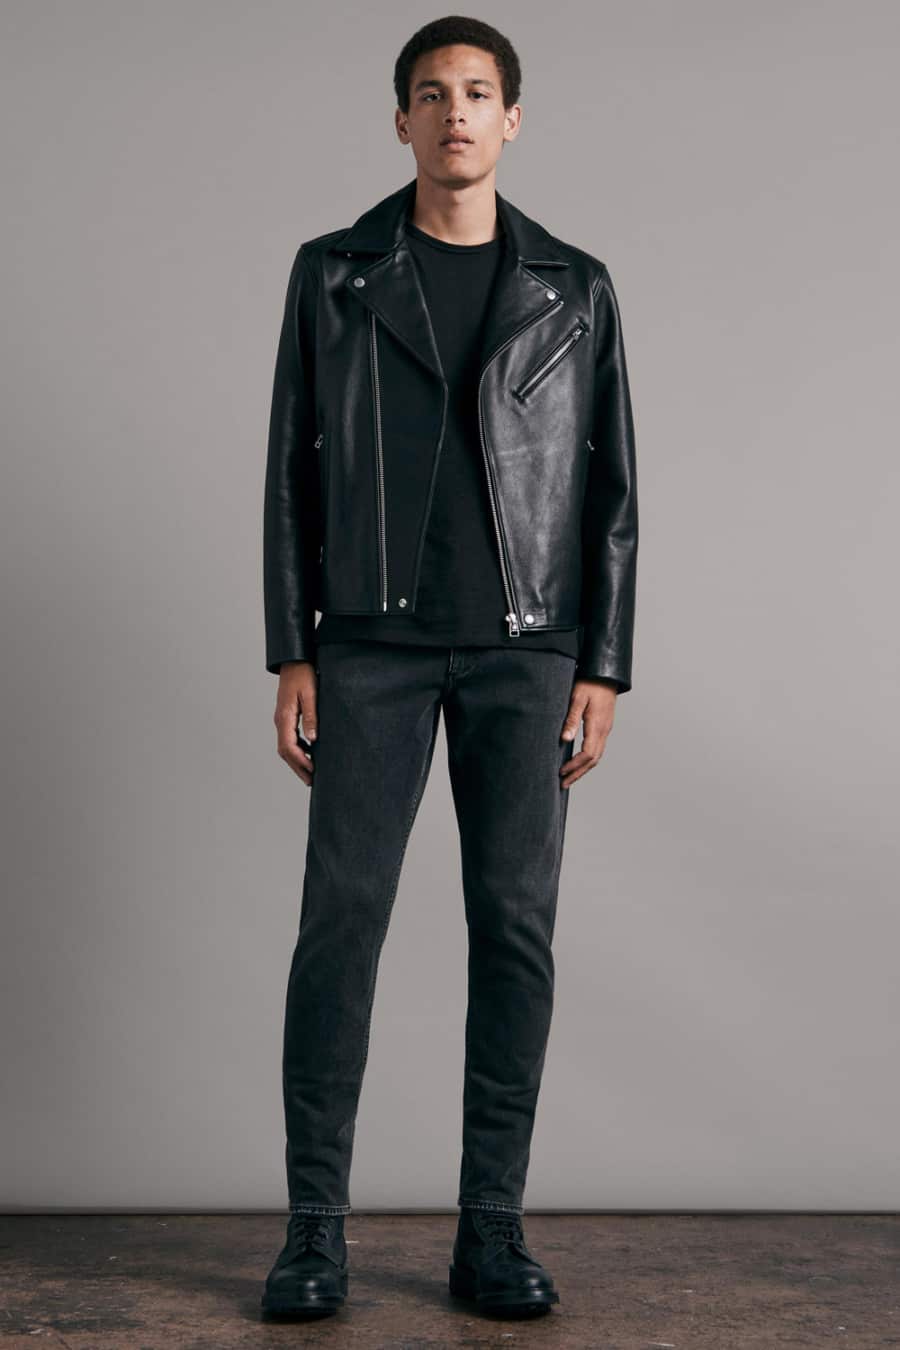 Men's black jeans, black long sleeve top, black leather biker jacket and black leather boots outfit